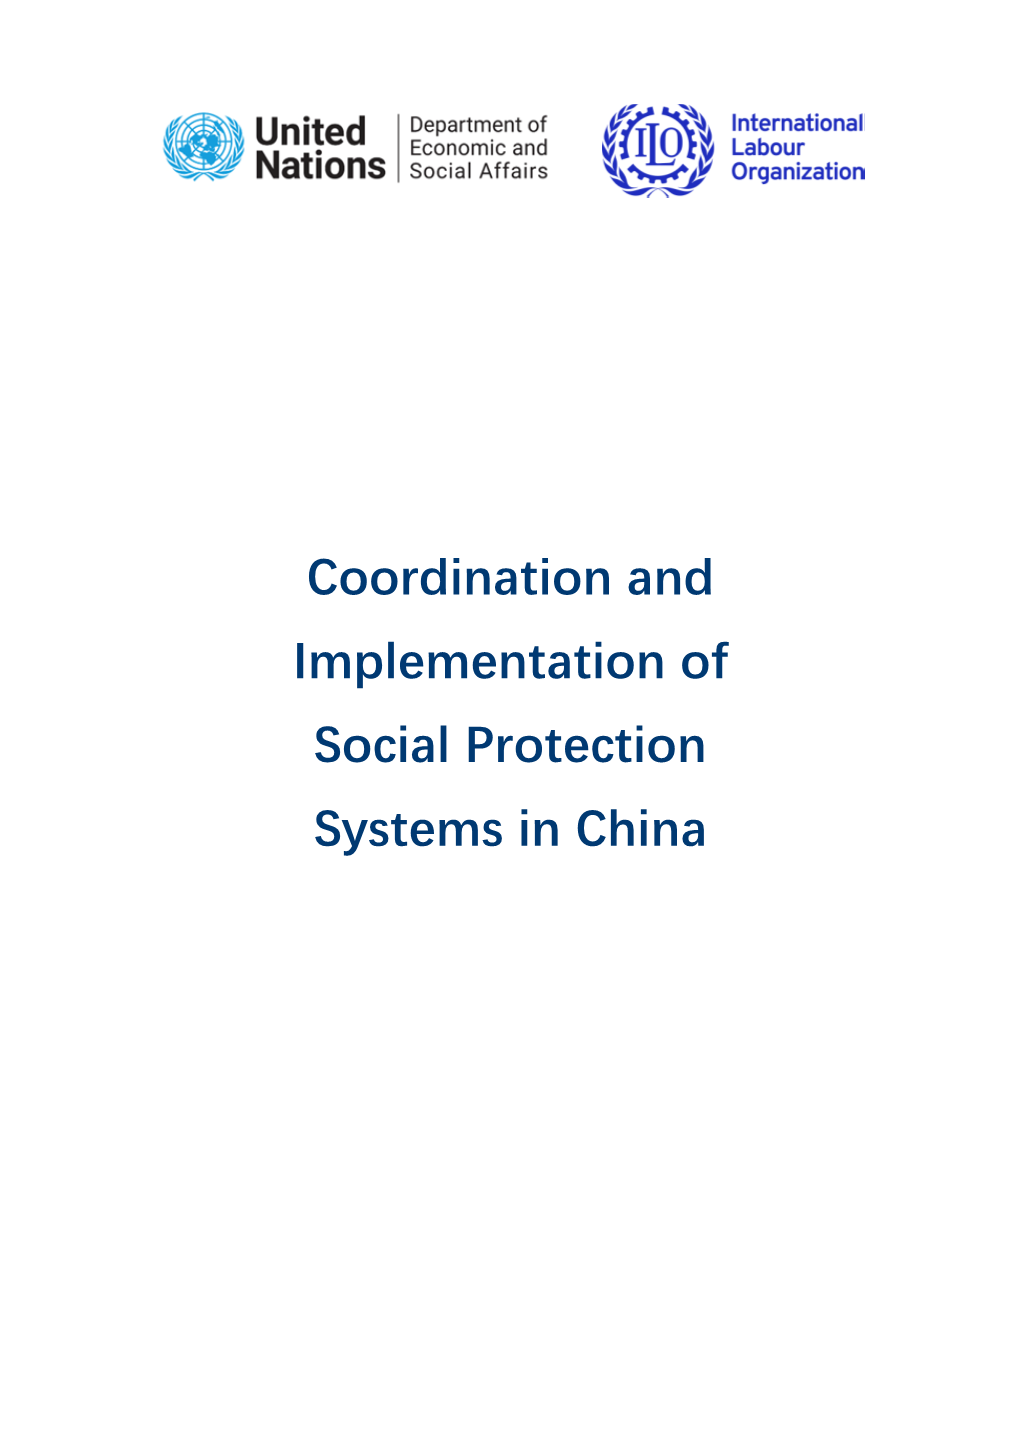 Coordination and Implementation of Social Protection Systems in China